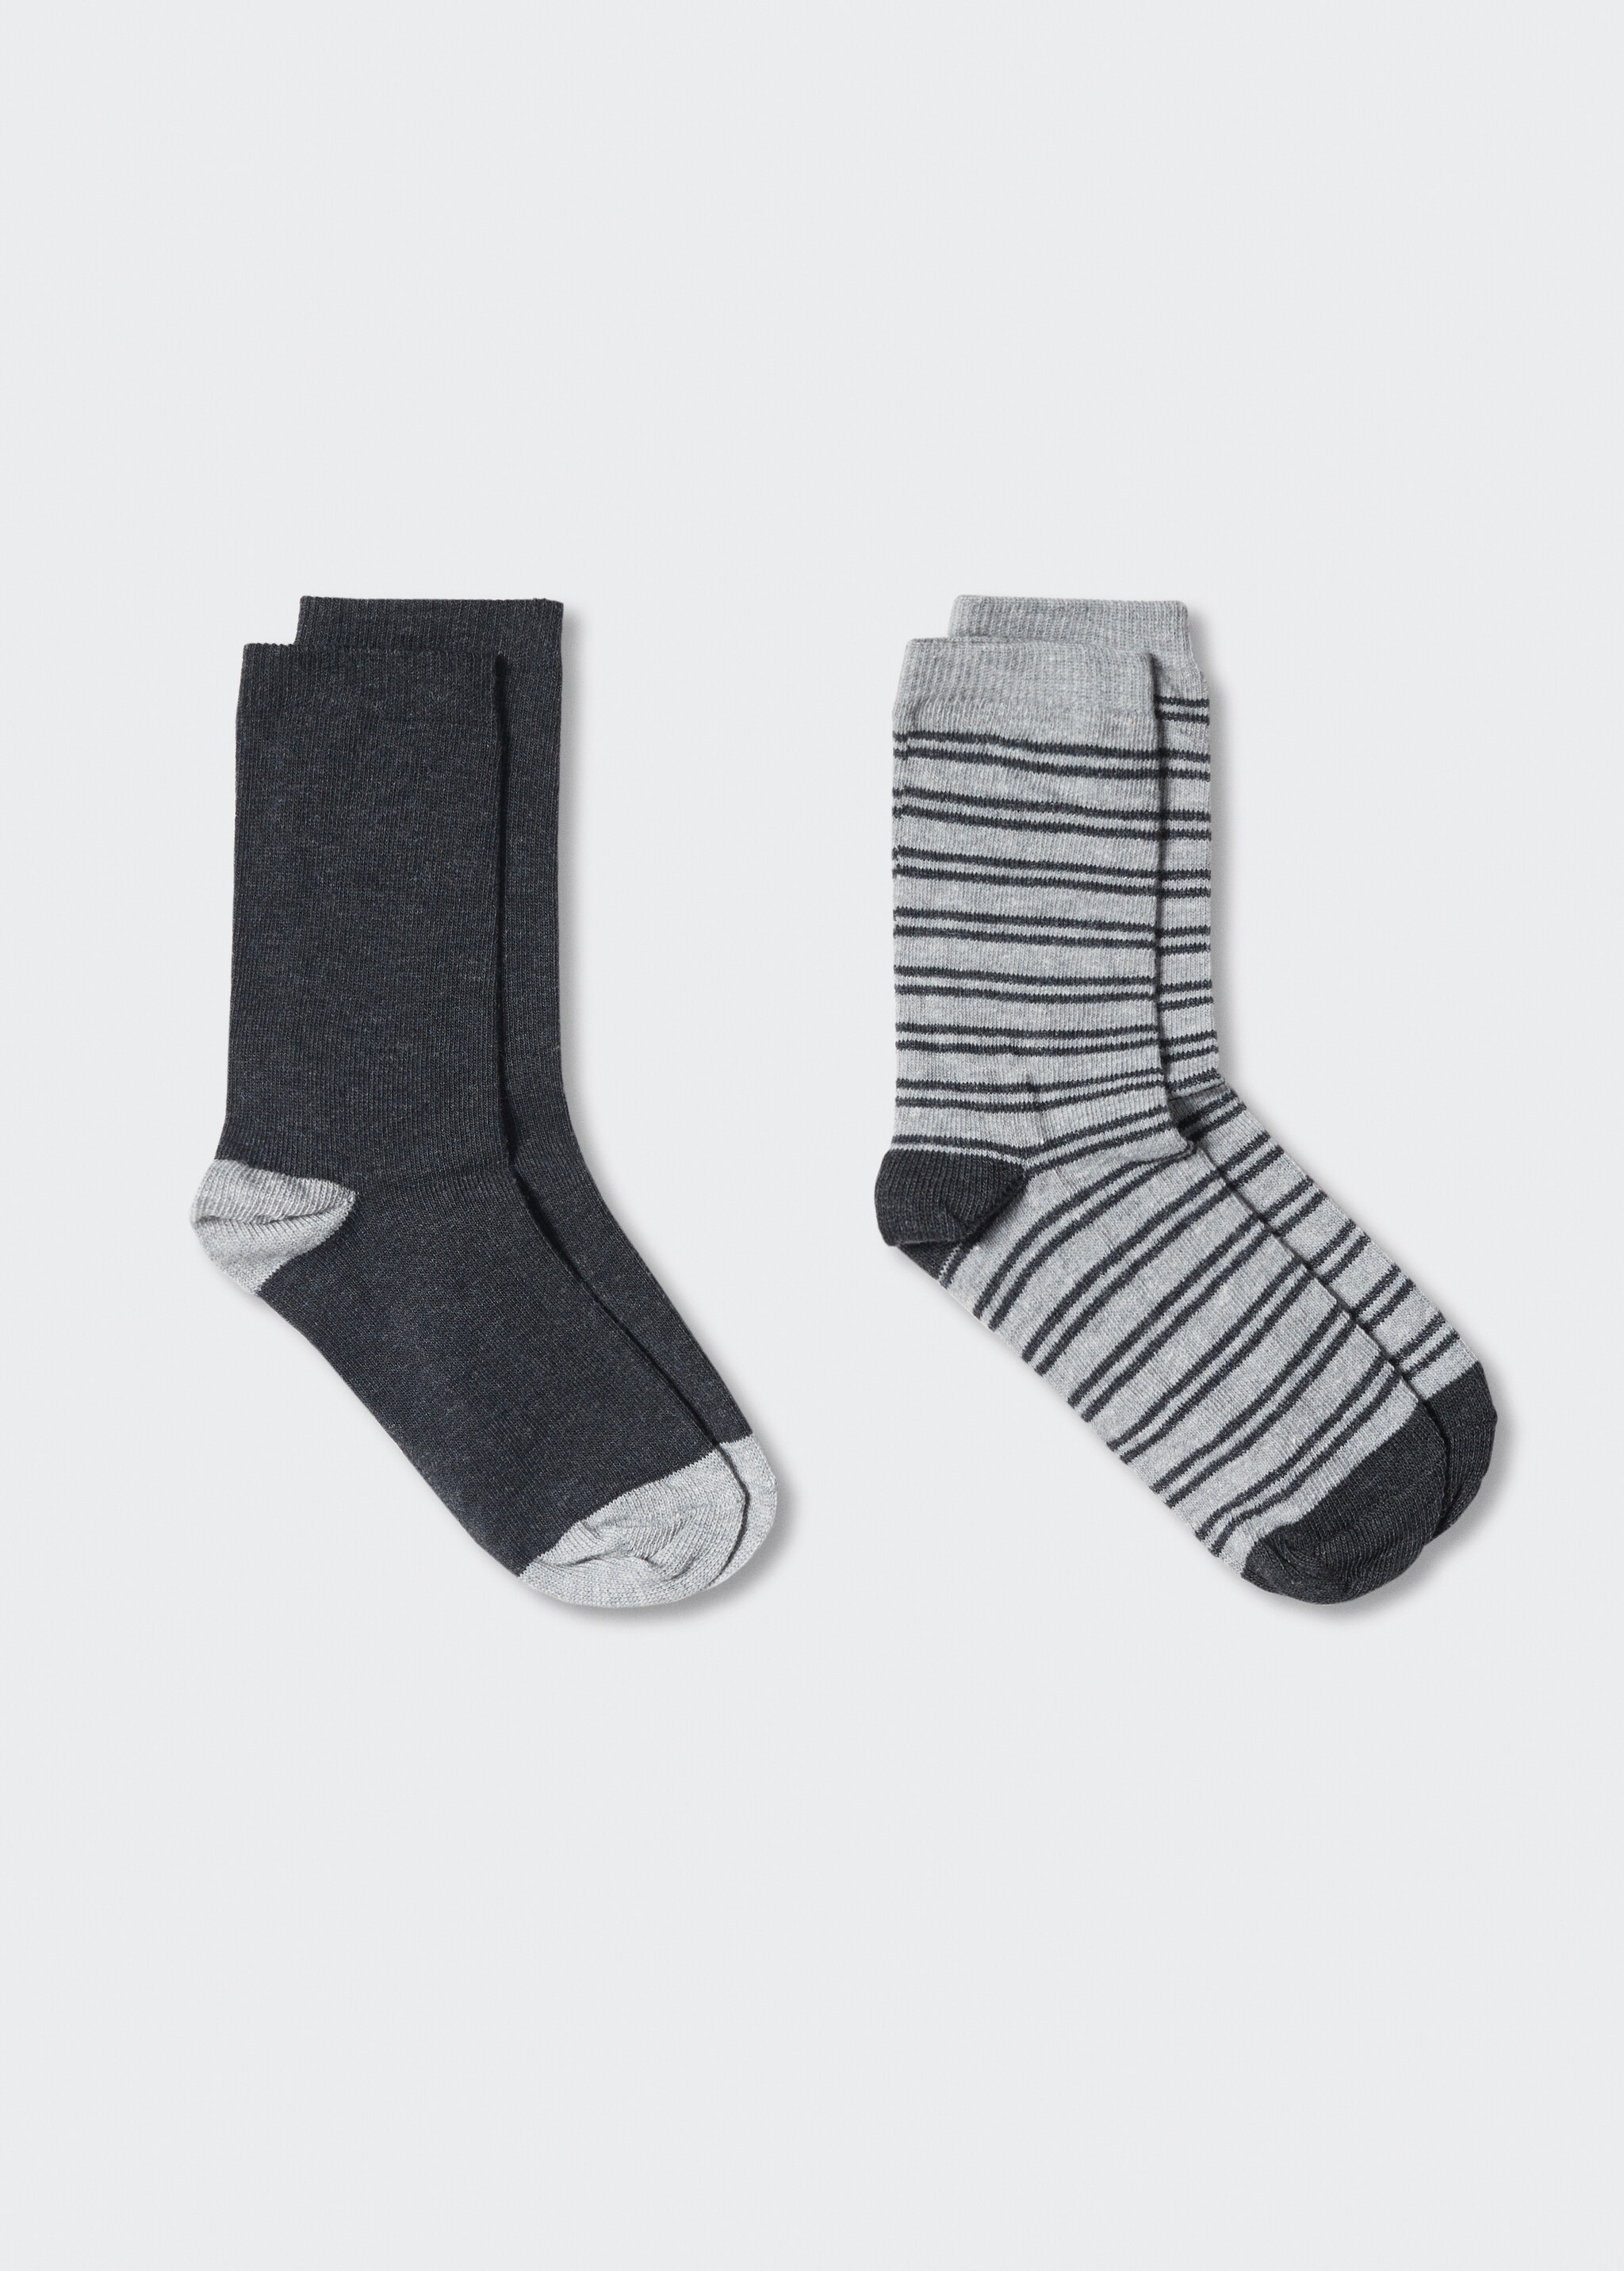 2 pack printed socks - Article without model